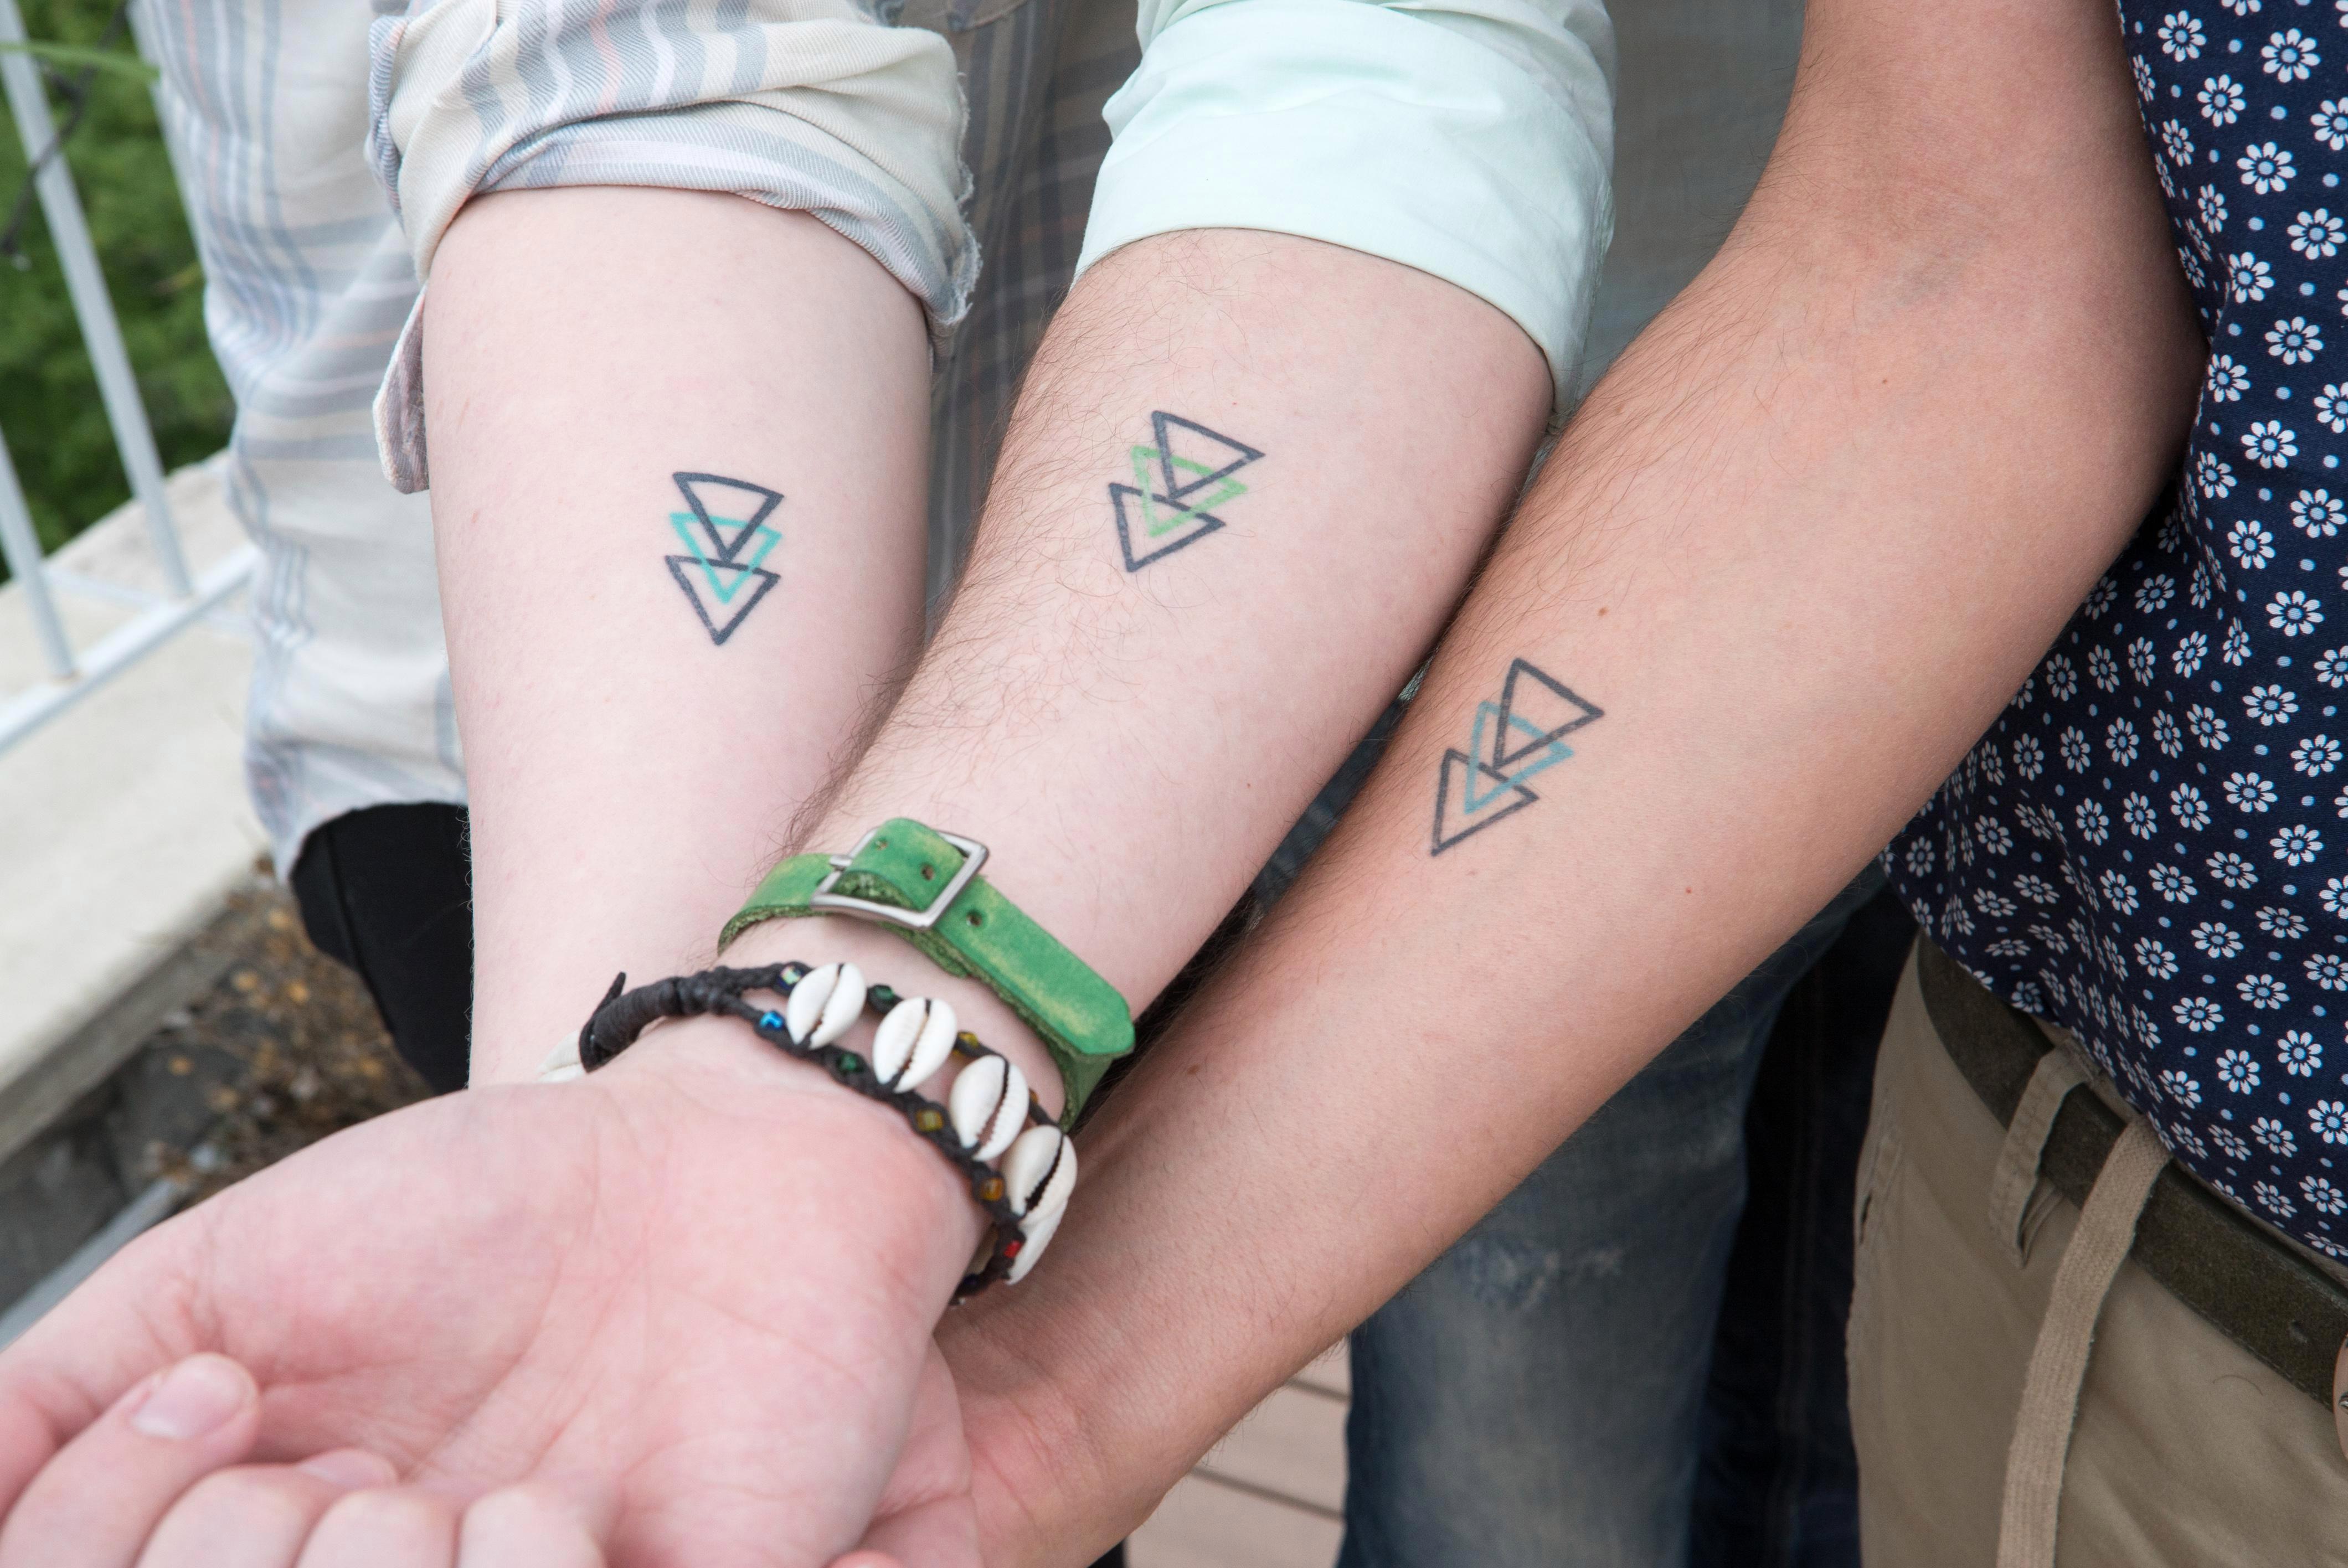  They sport matching tattoos on their forearms celebrating their relationship